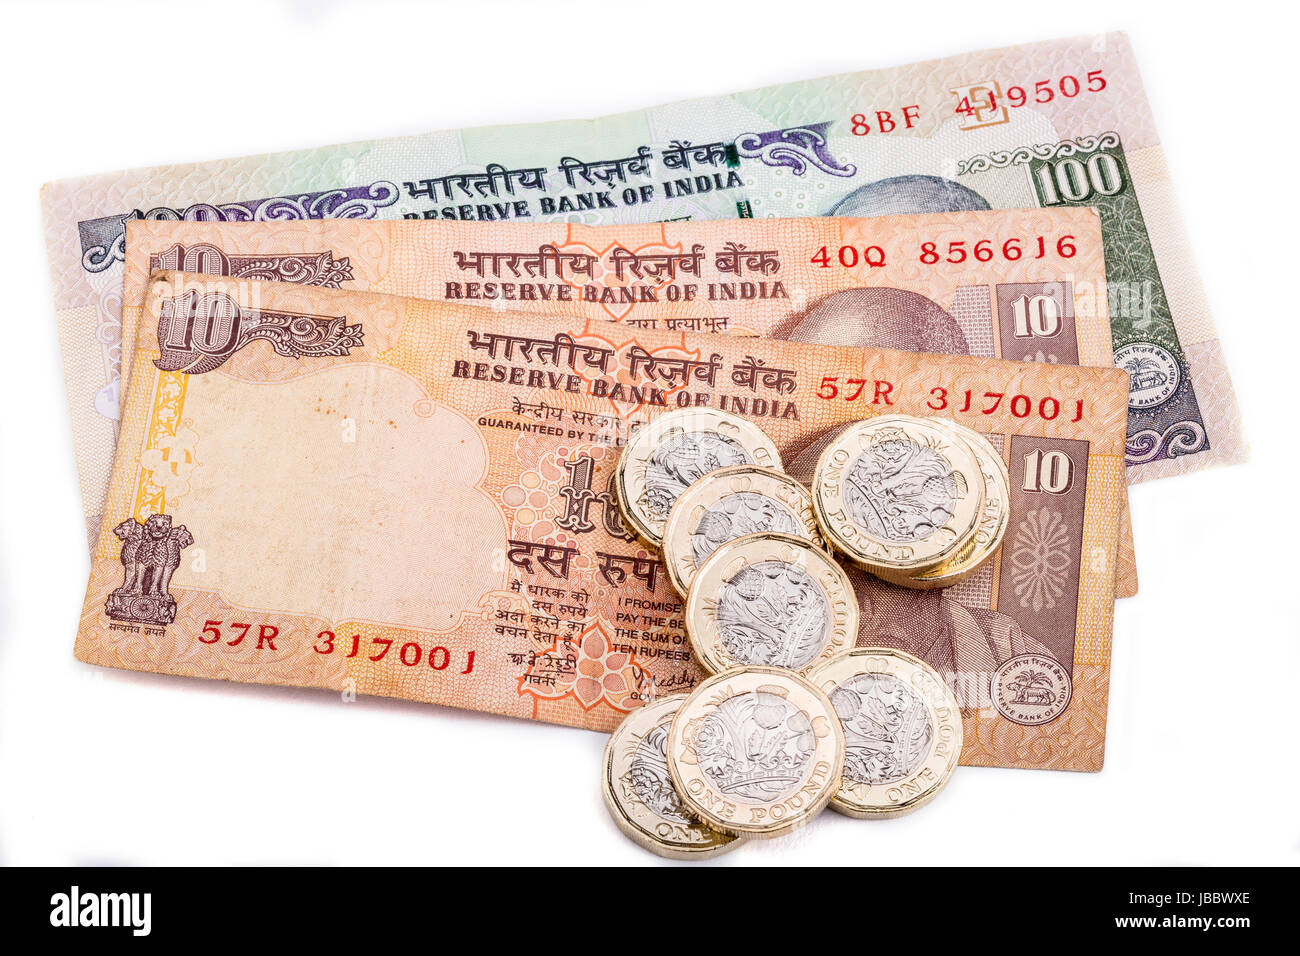 British pound coins laid on Indian Rupee notes Stock Photo